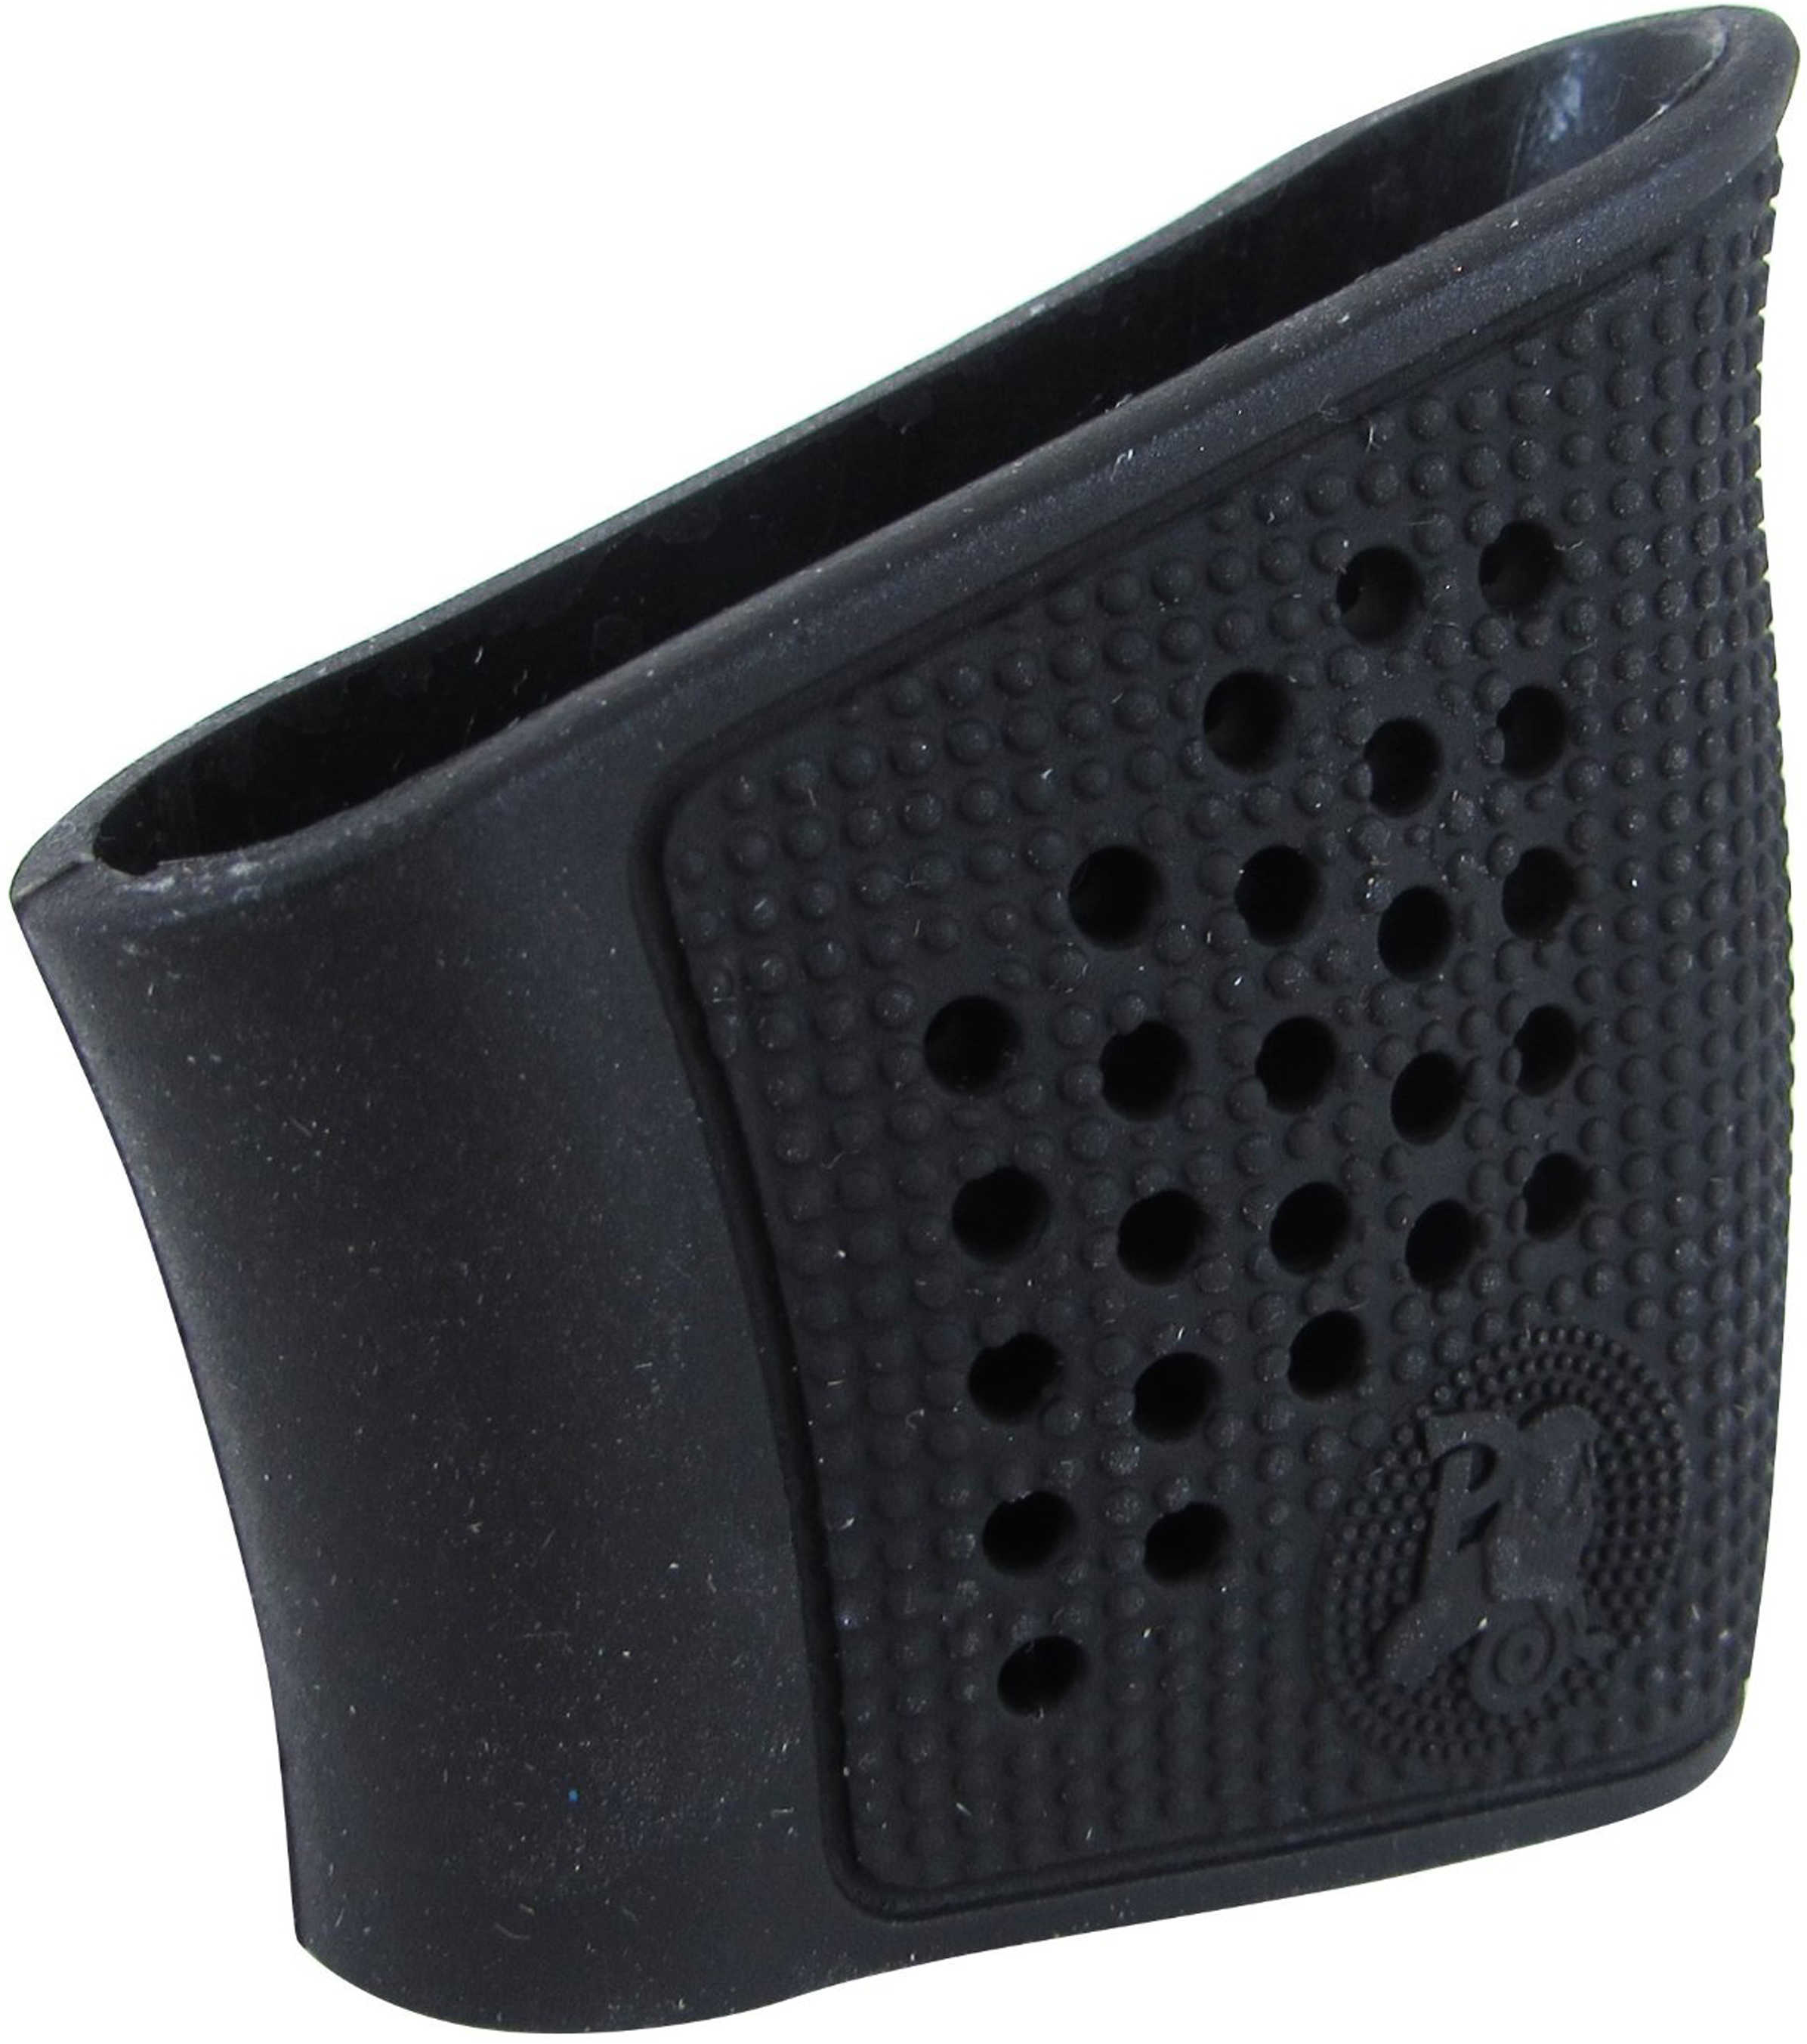 Pachmayr Tactical Grip Glove For Glock .42